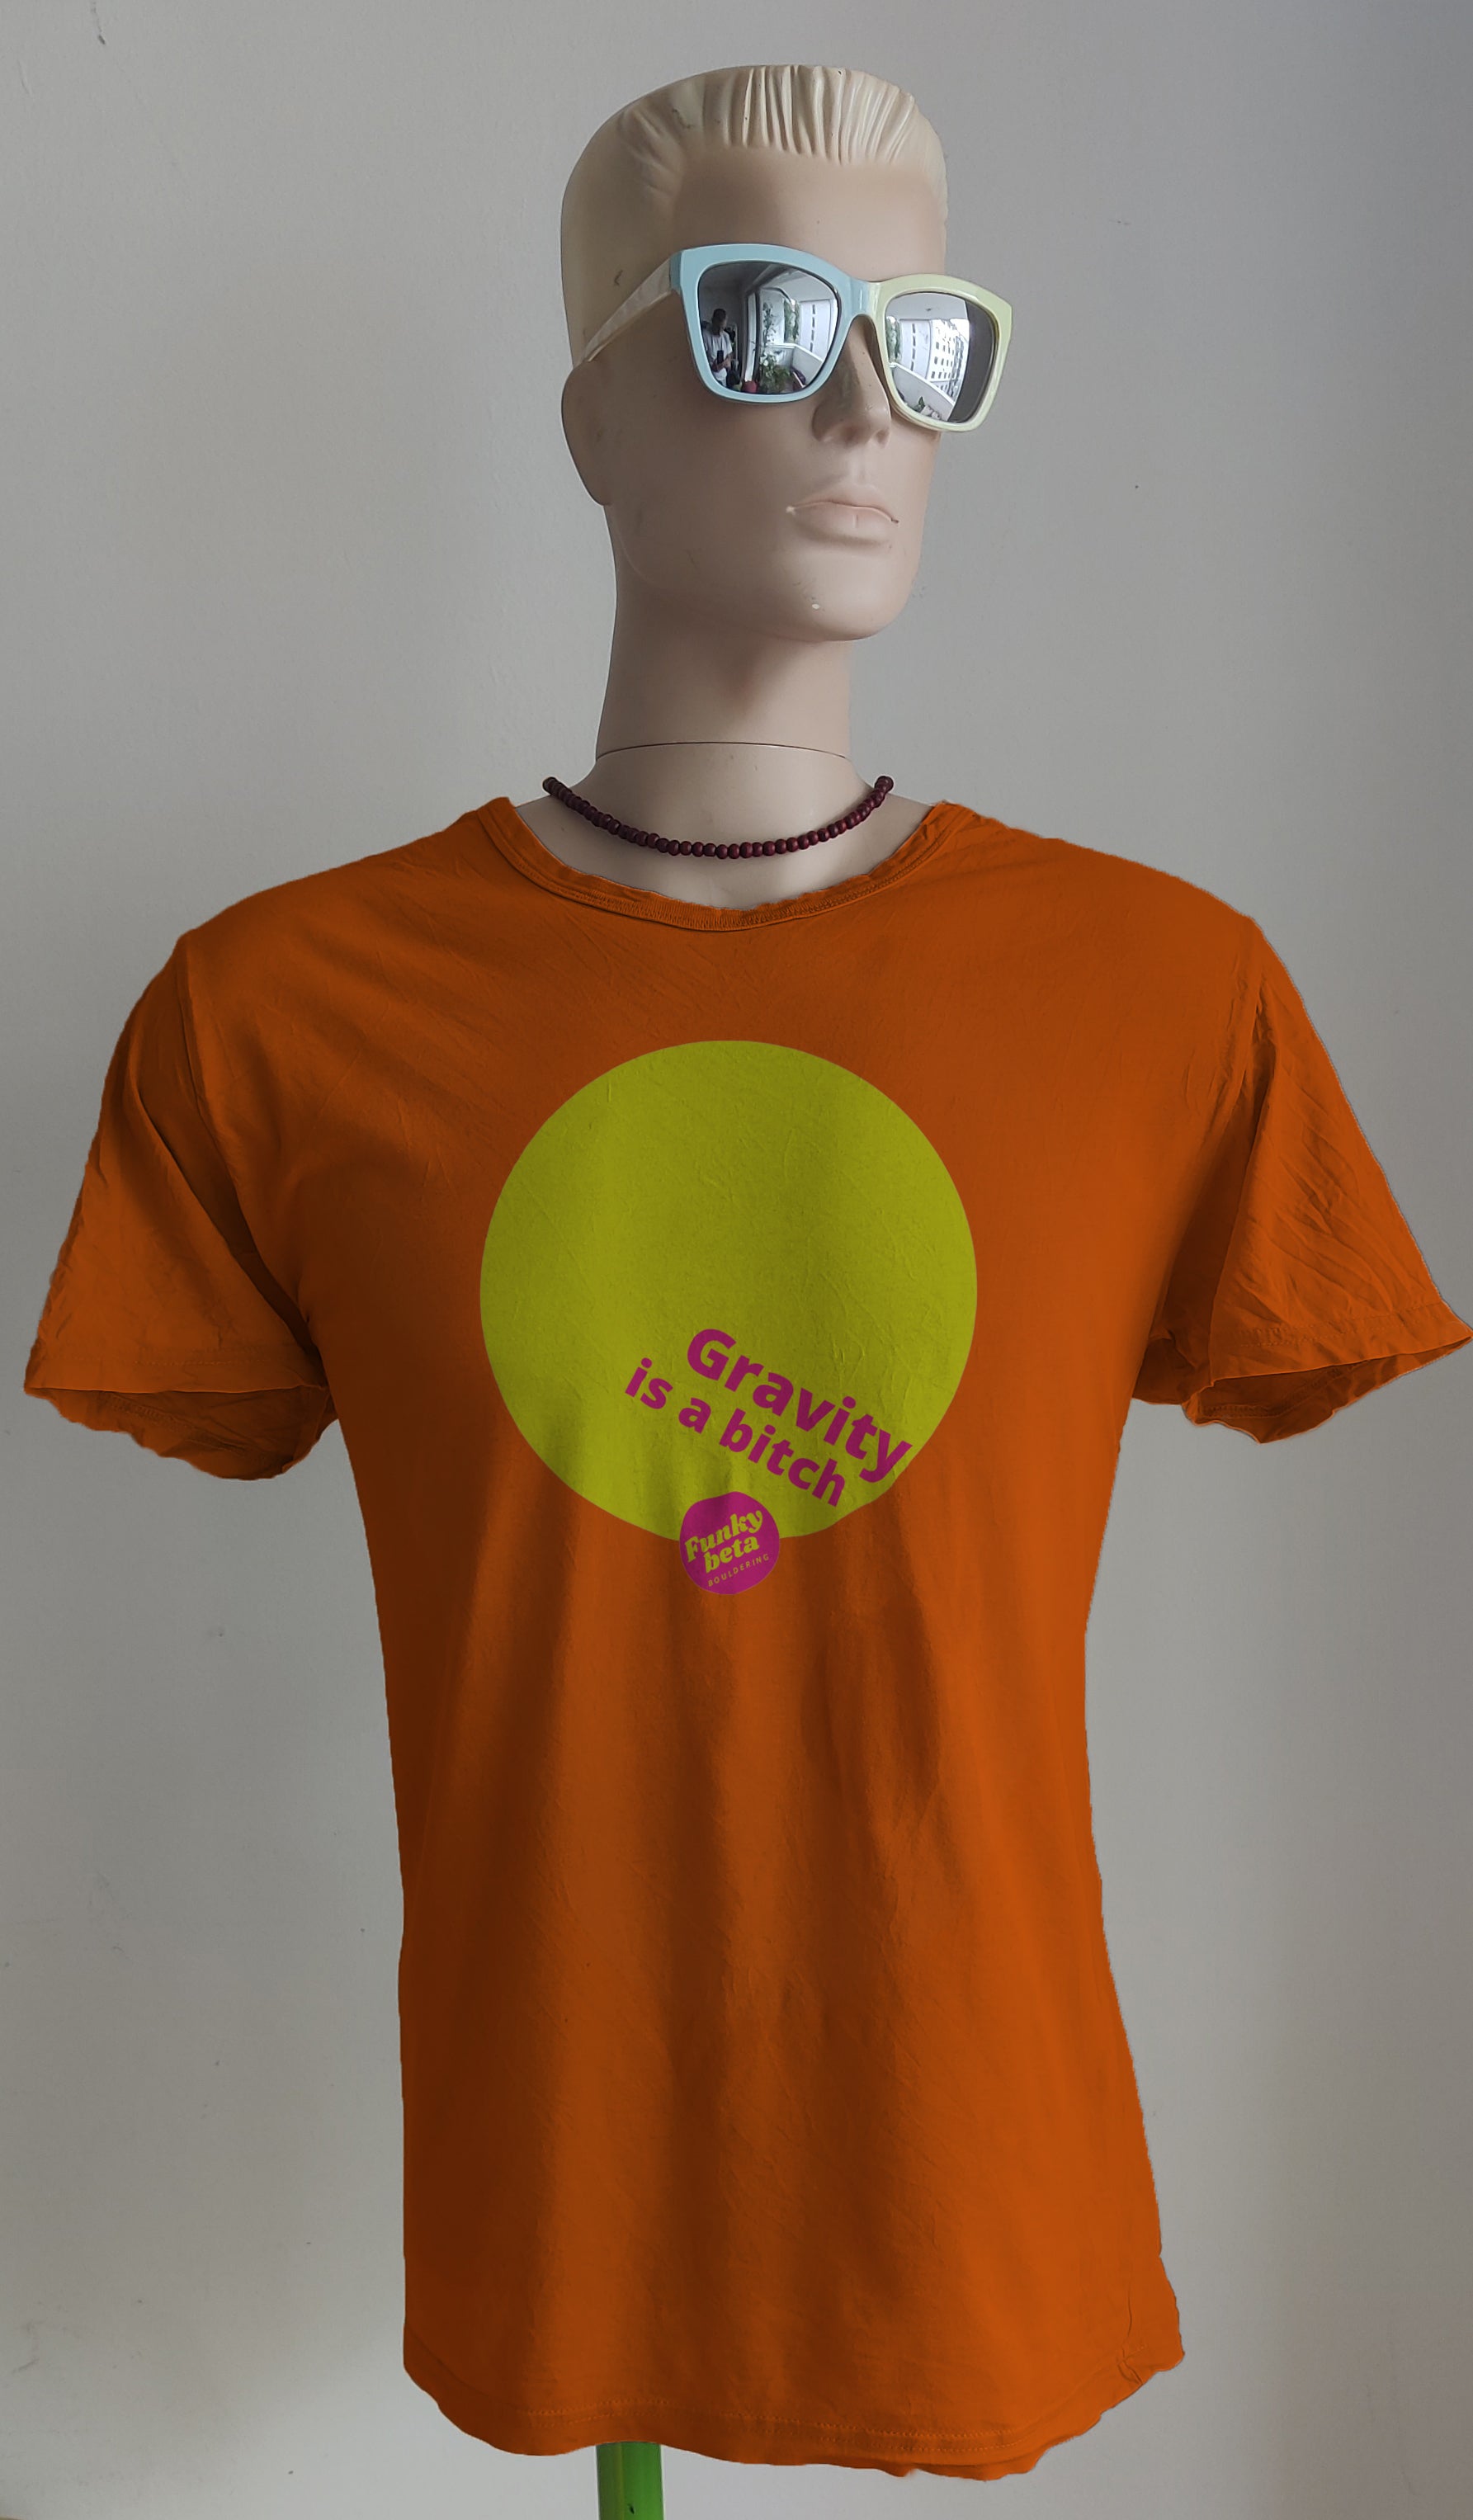 Gravity Is a B**** - Climbing T-shirt by Funkybeta Bouldering